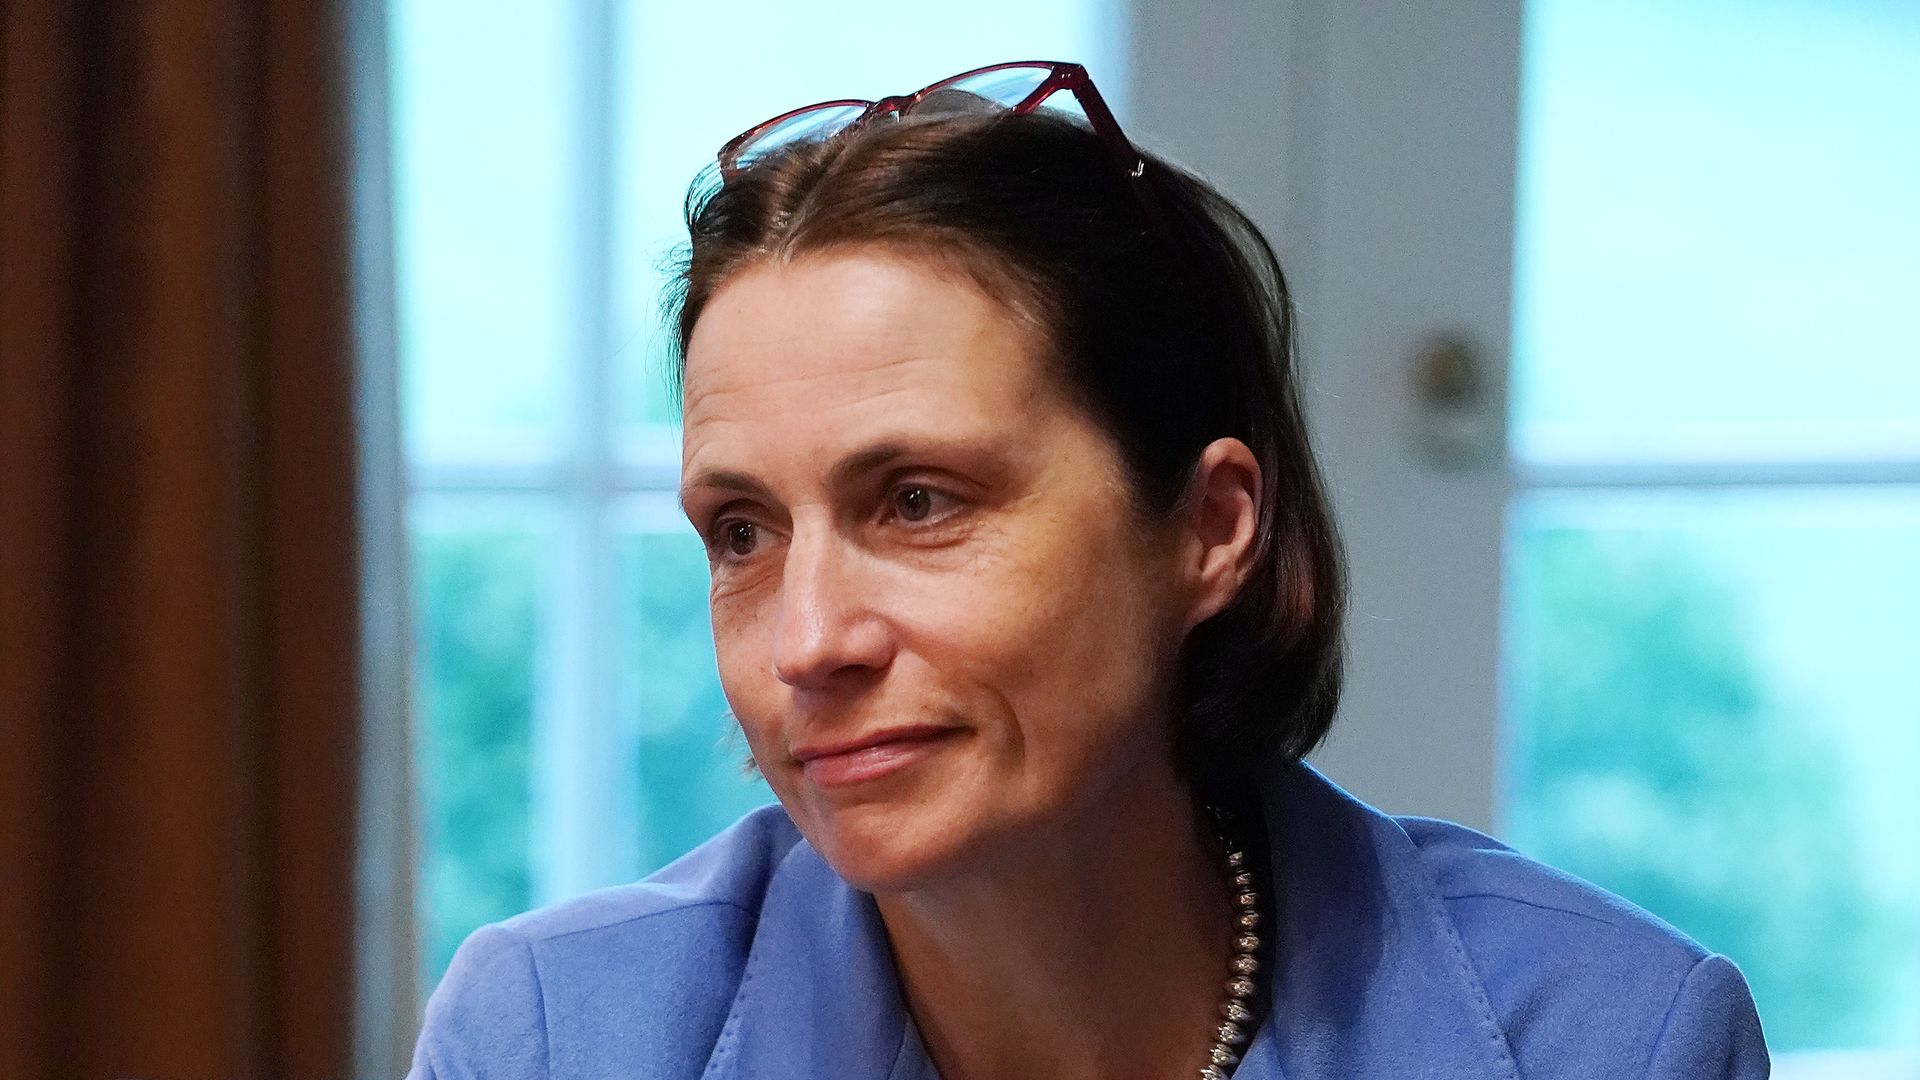 Former Special Assistant to the President and Senior Director for European and Russian Affairs Fiona Hill 